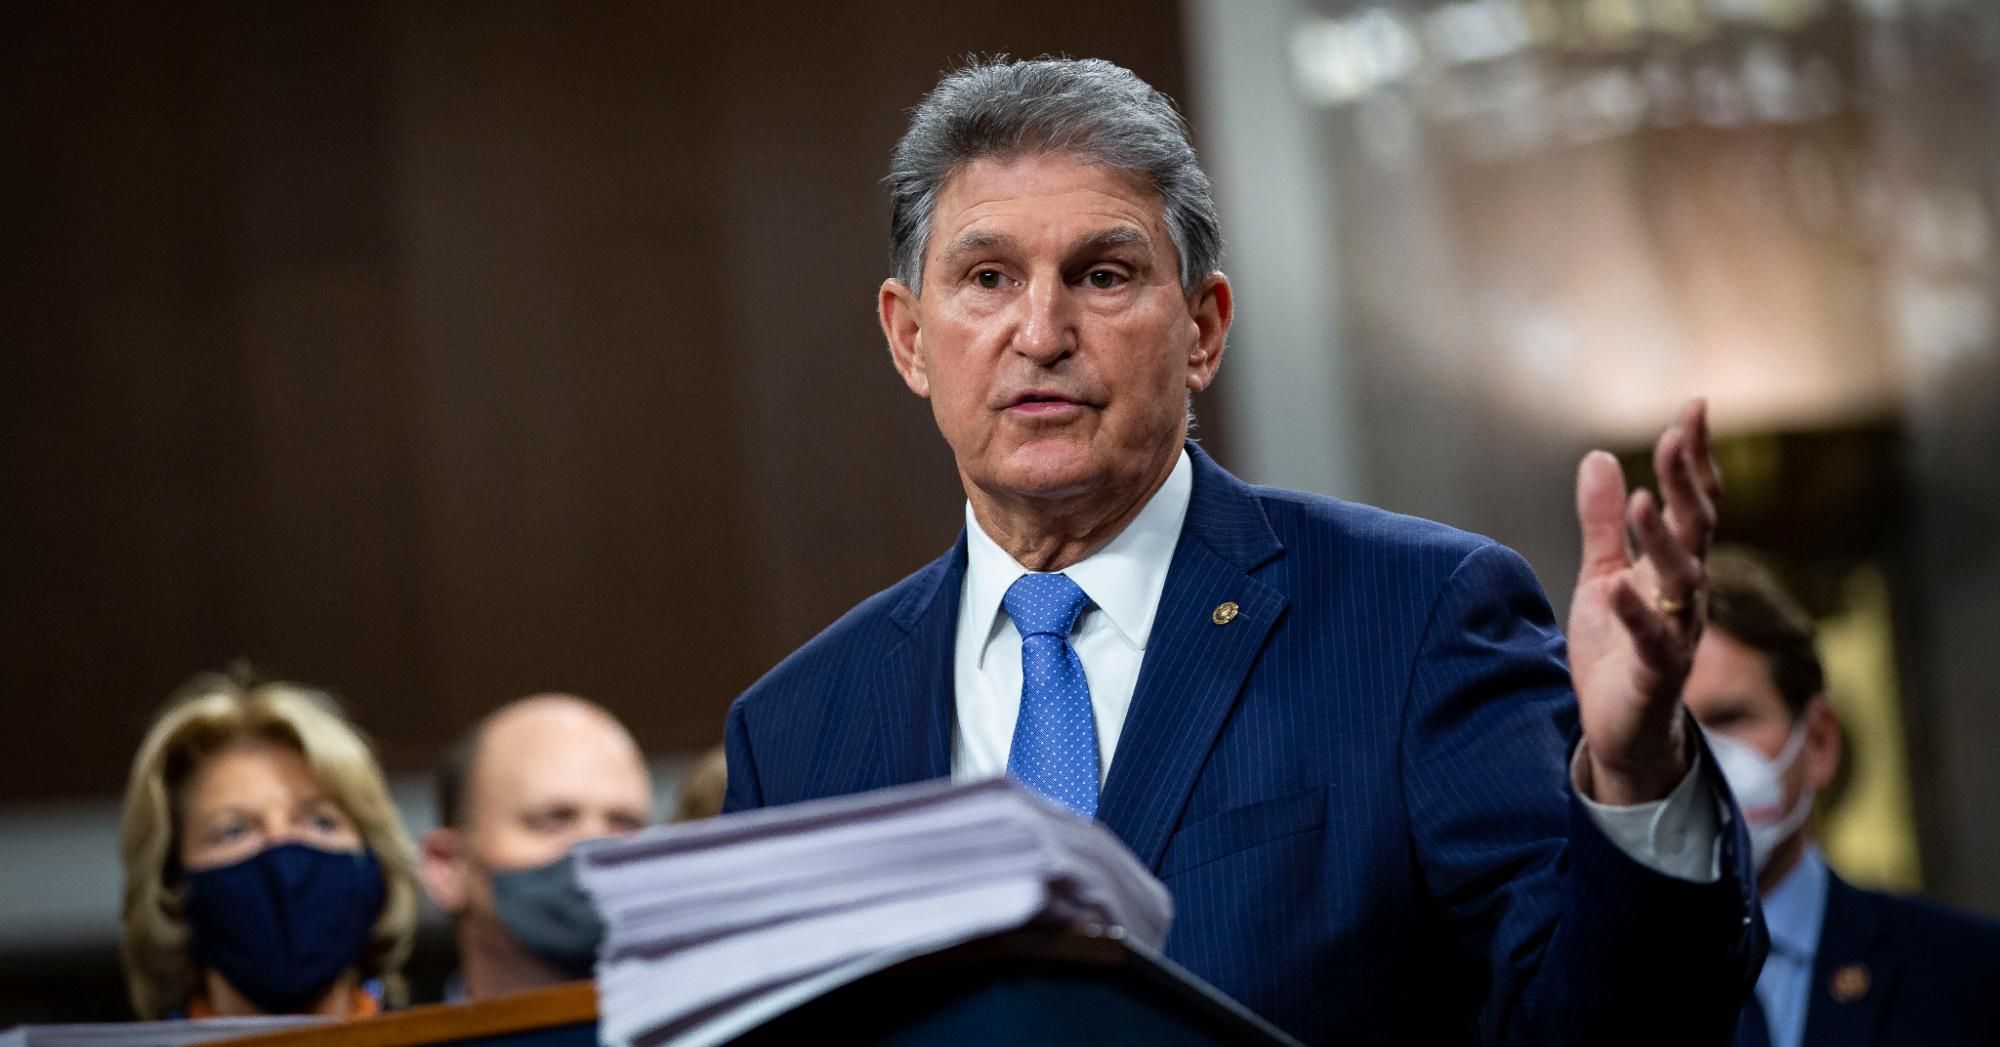 Sen. Joe Manchin opposes making Washington, D.C. the nation's 51st state through the legislative process, arguing that a constitutional amendment is needed for the popular move. (Photo: Al Drago/Washington Post via Getty Images) 